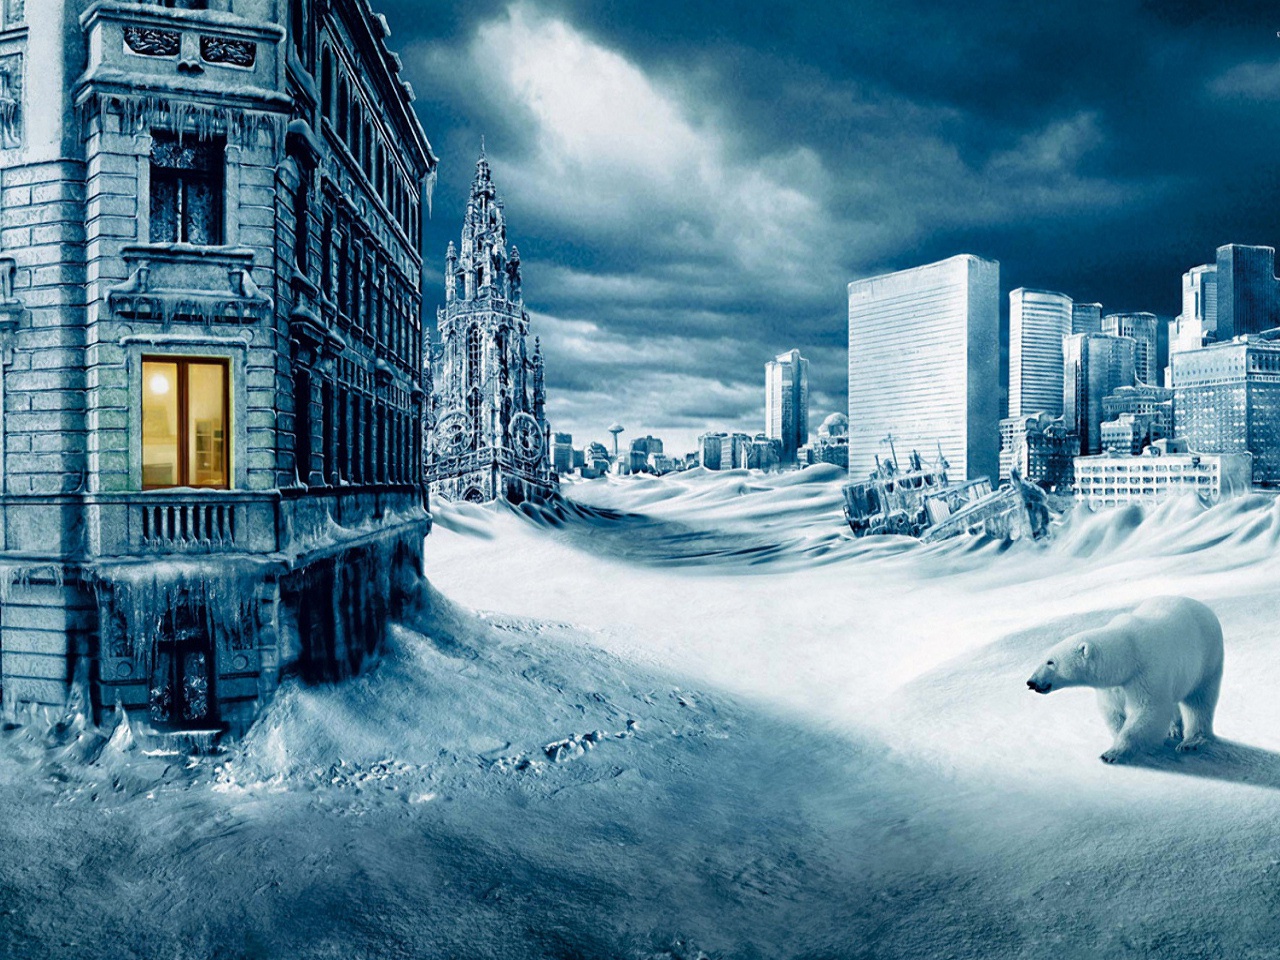 New Ice Age in 1280x960 resolution - HD Desktop Backgrounds